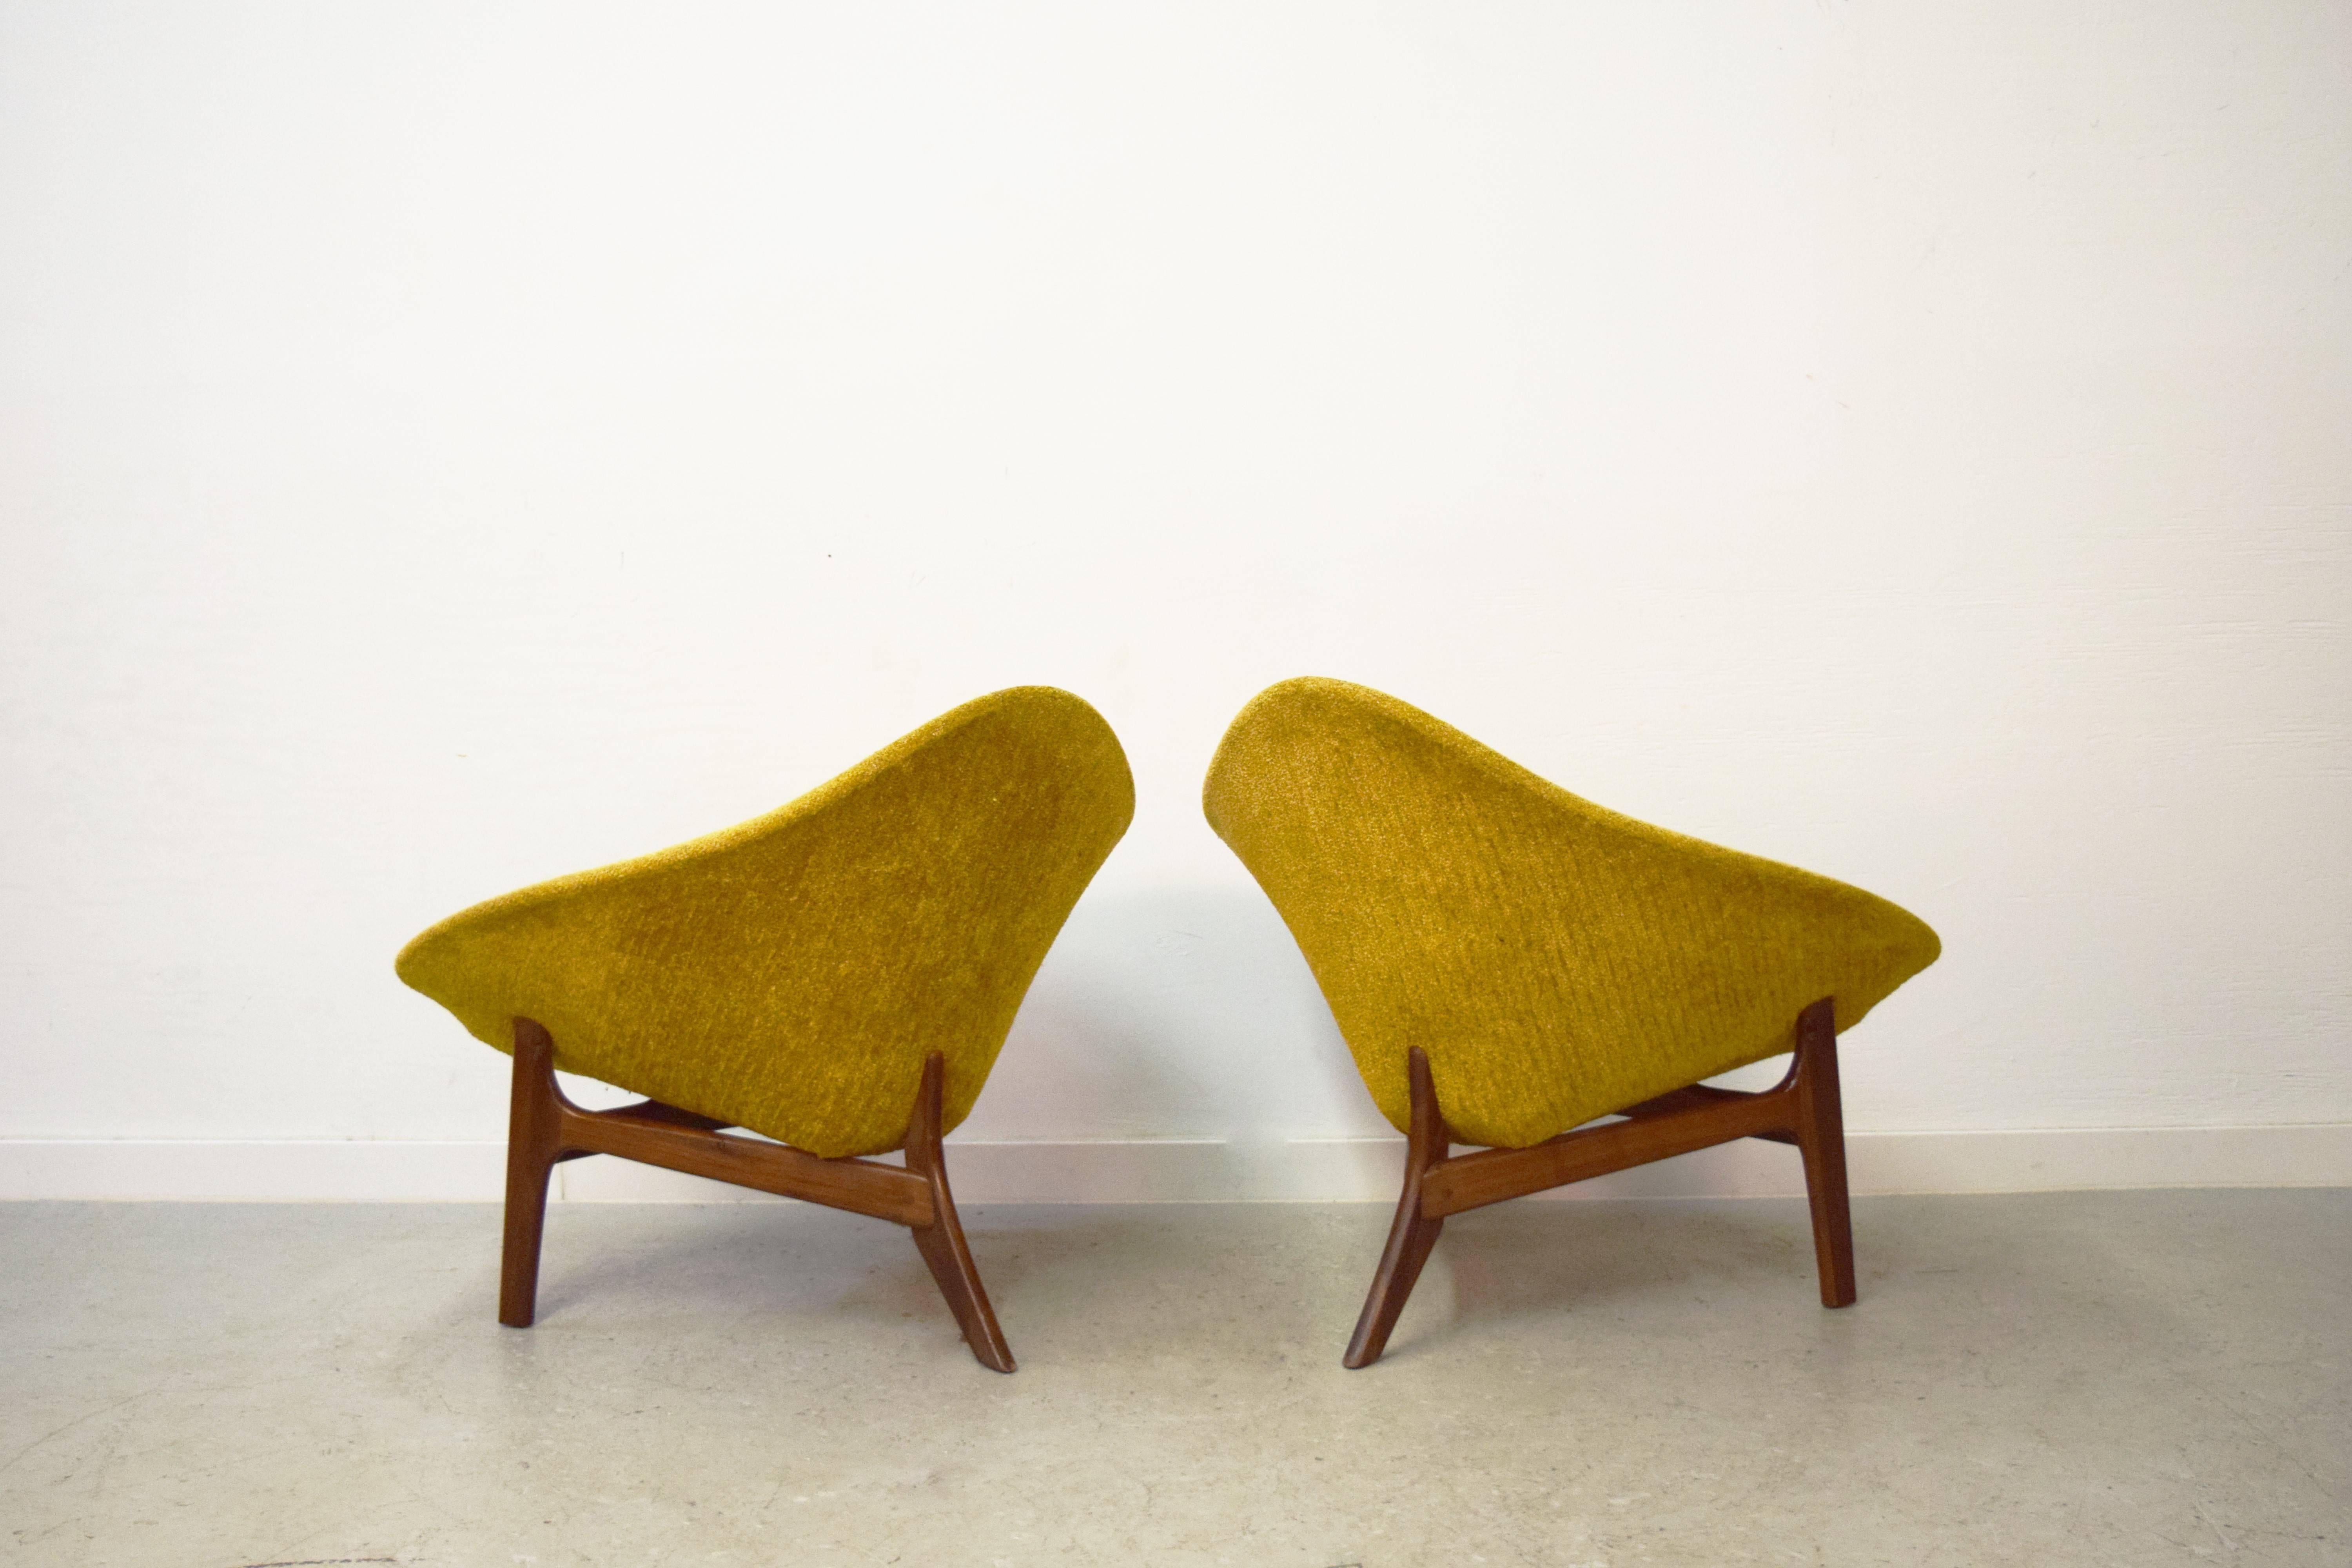 American Pair of Adrian Pearsall Lounge Chairs for Craft Associates